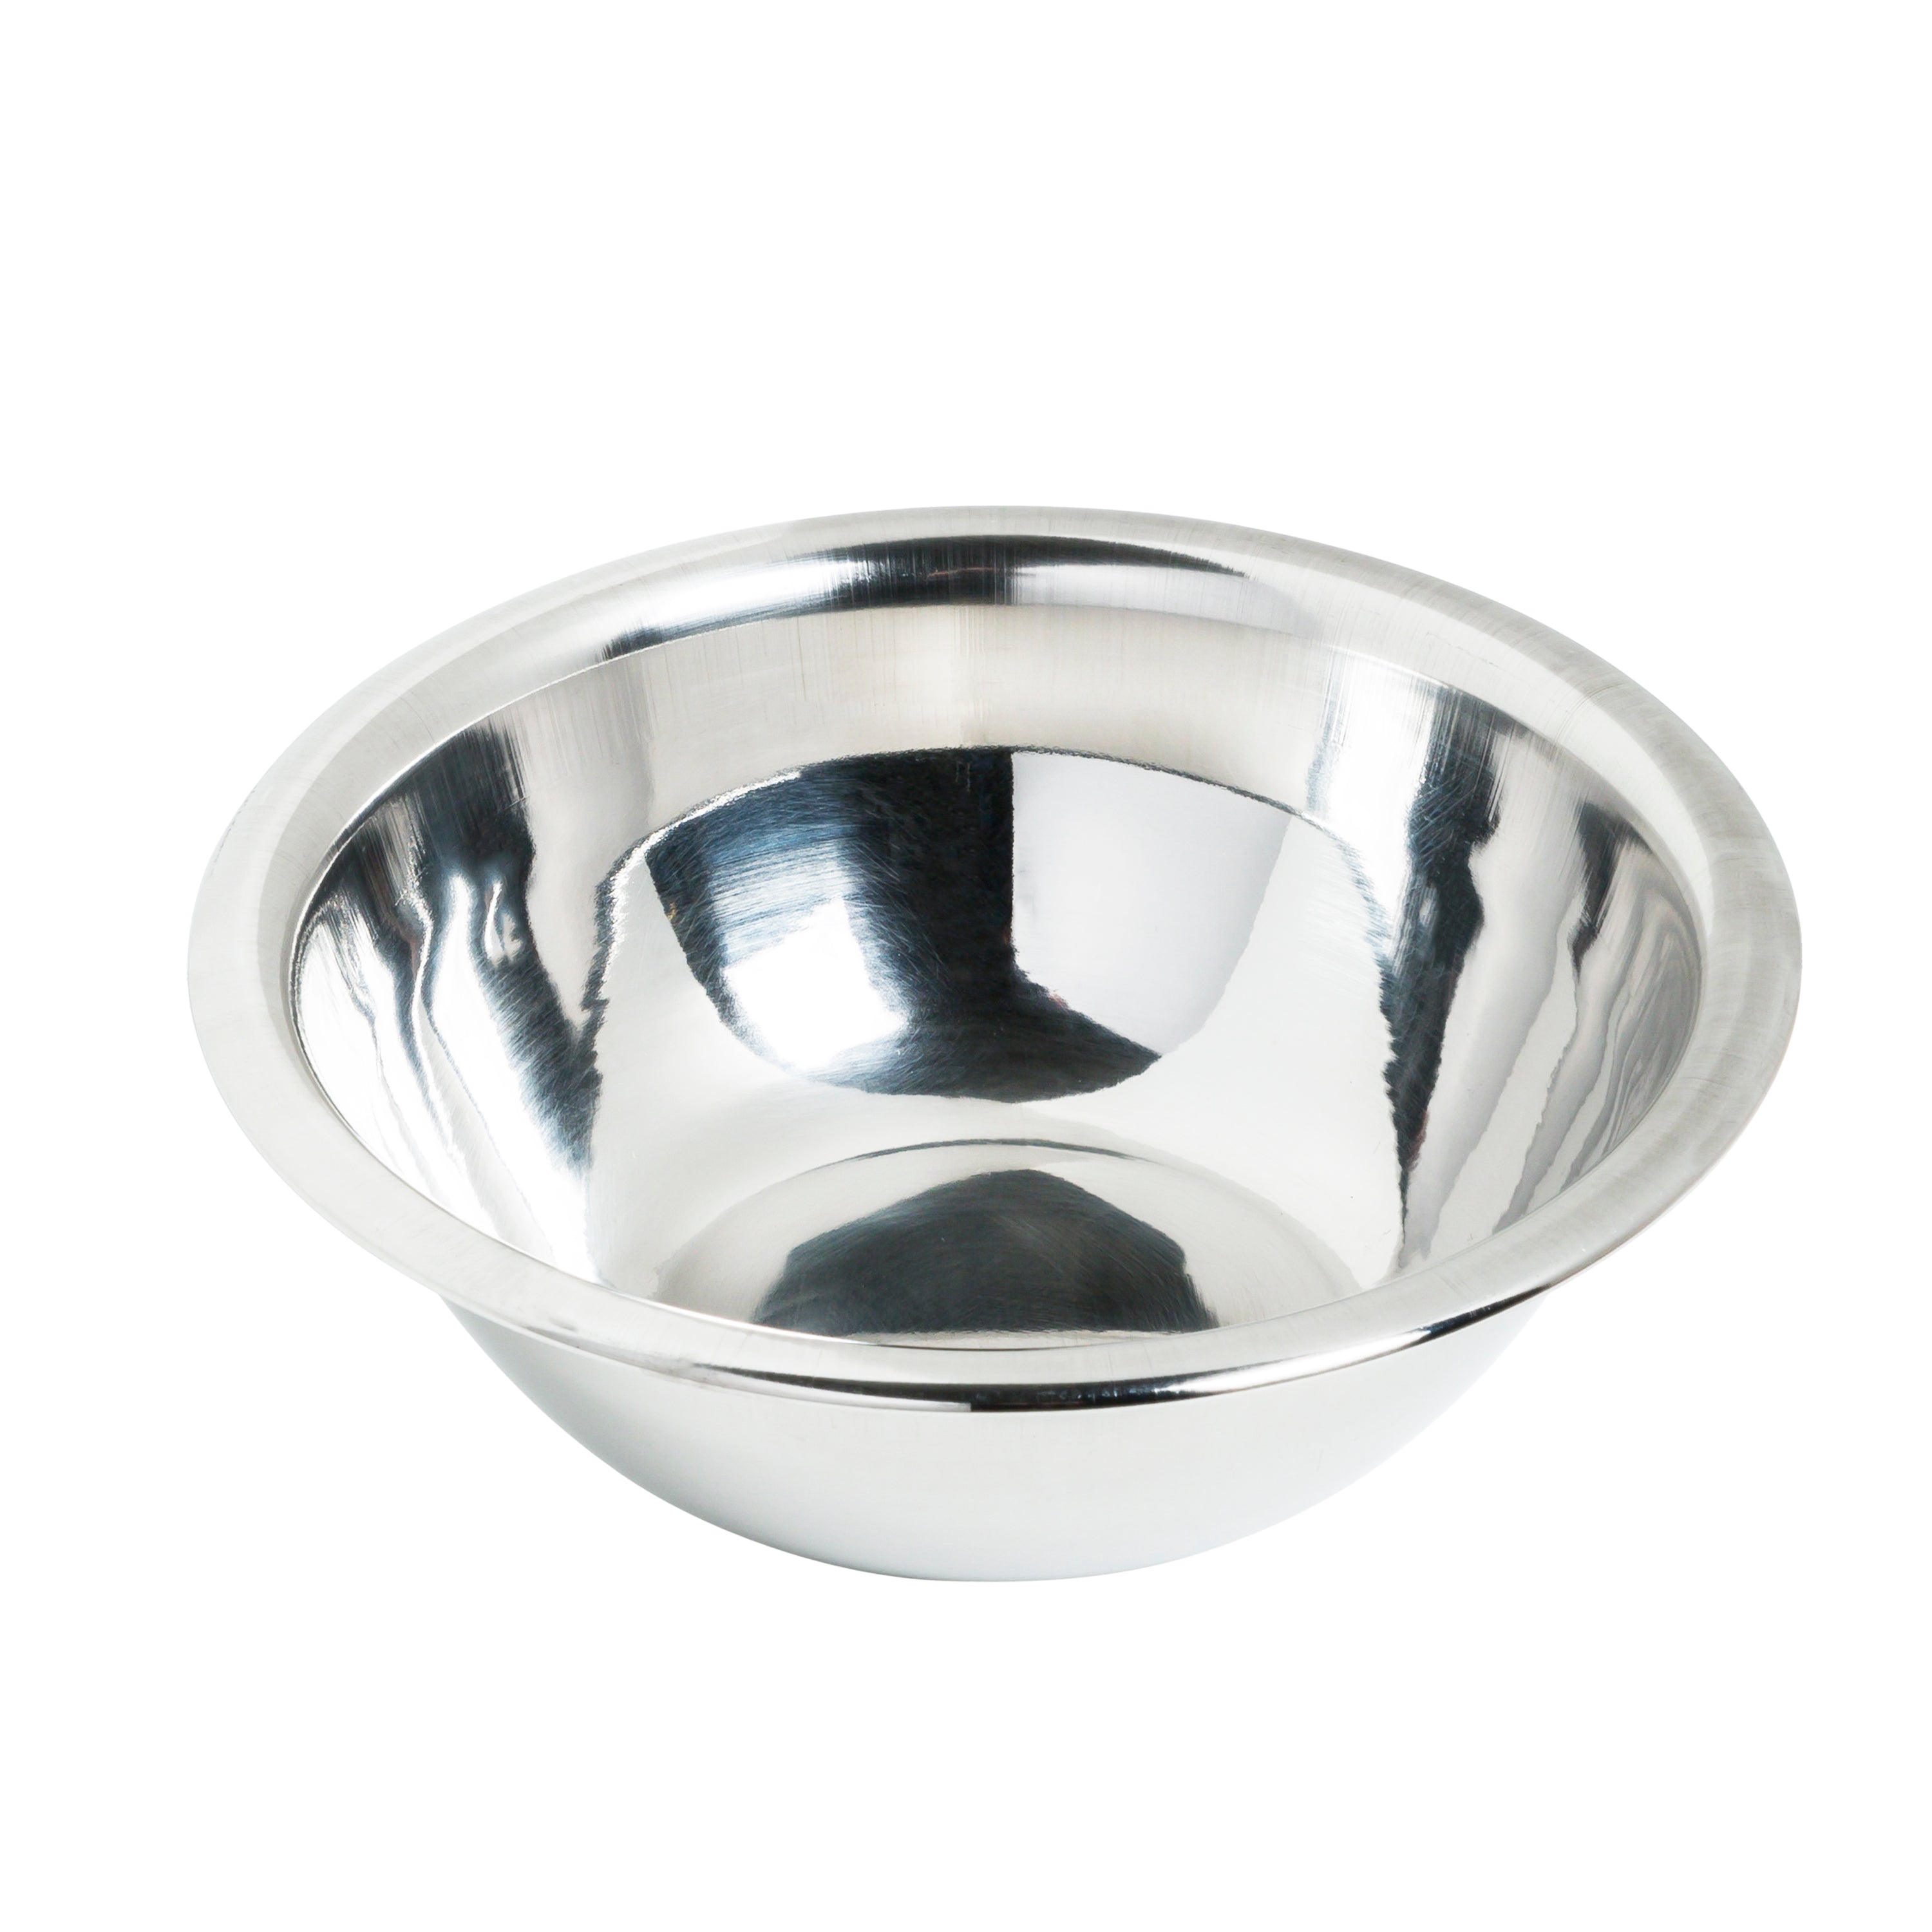 heavy duty stainless steel mixing bowls made in usa